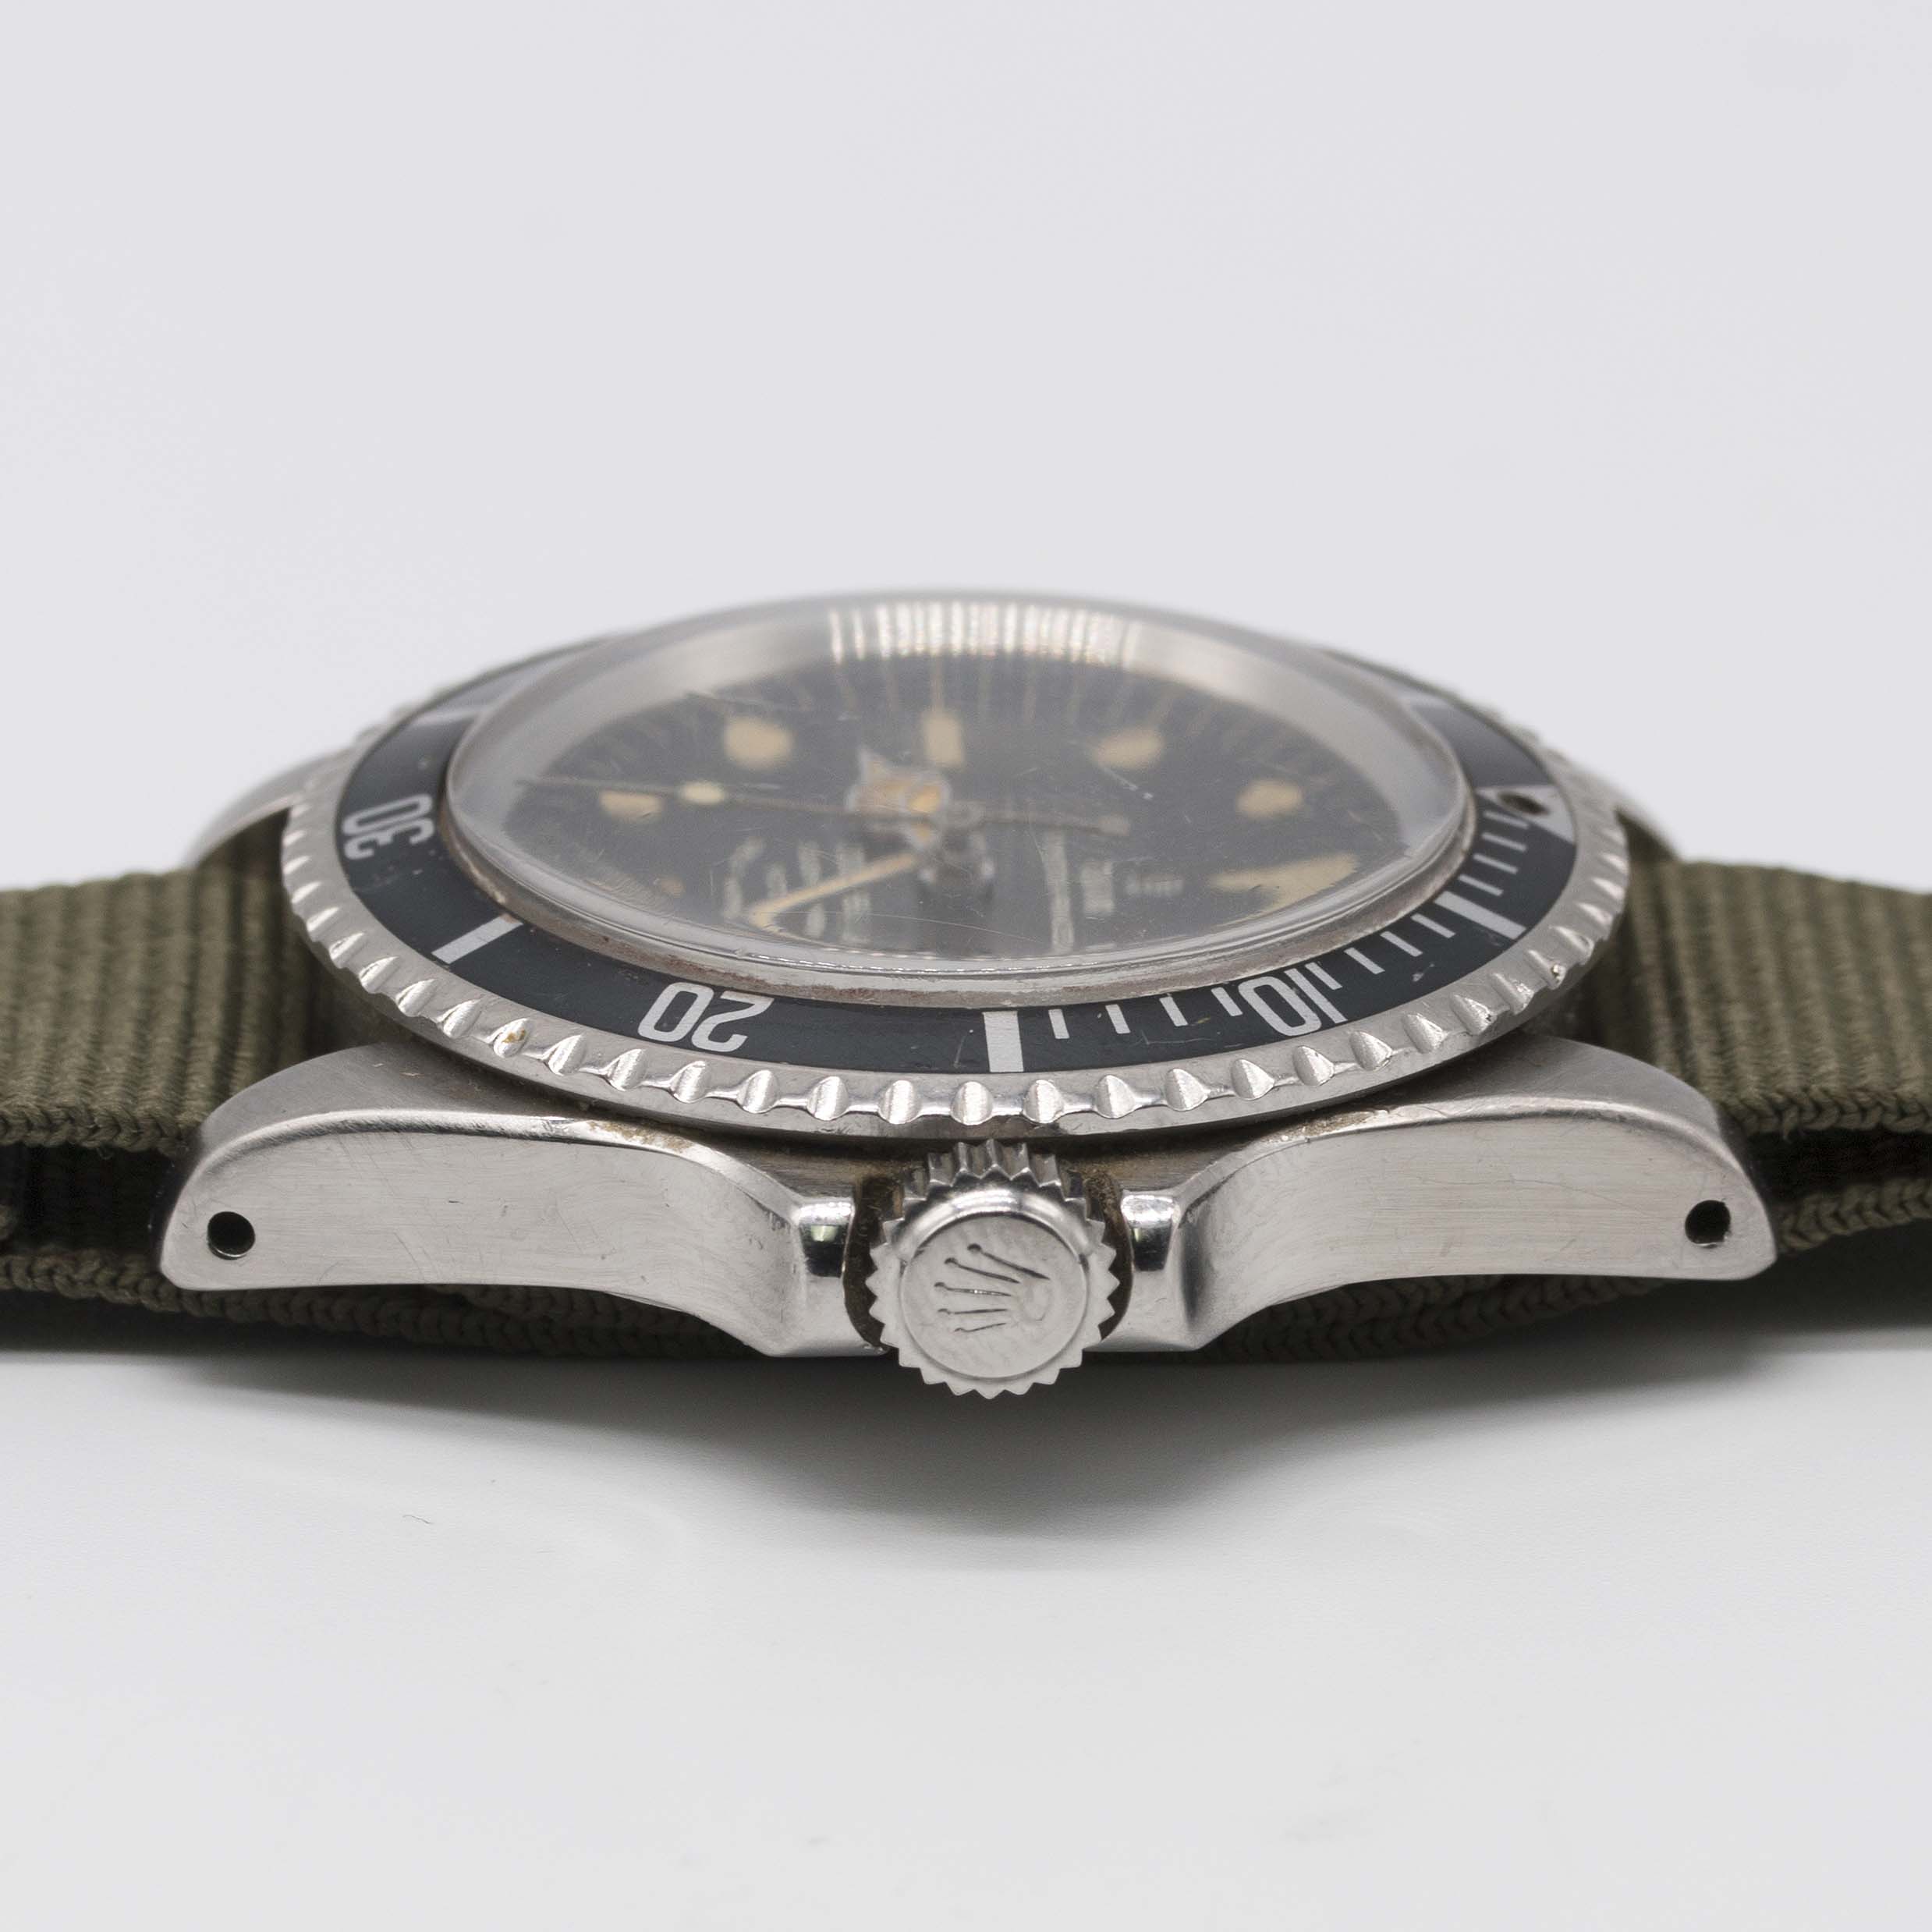 A GENTLEMAN'S STAINLESS STEEL ROLEX TUDOR OYSTER PRINCE SUBMARINER WRIST WATCH CIRCA 1967, REF. - Image 9 of 10